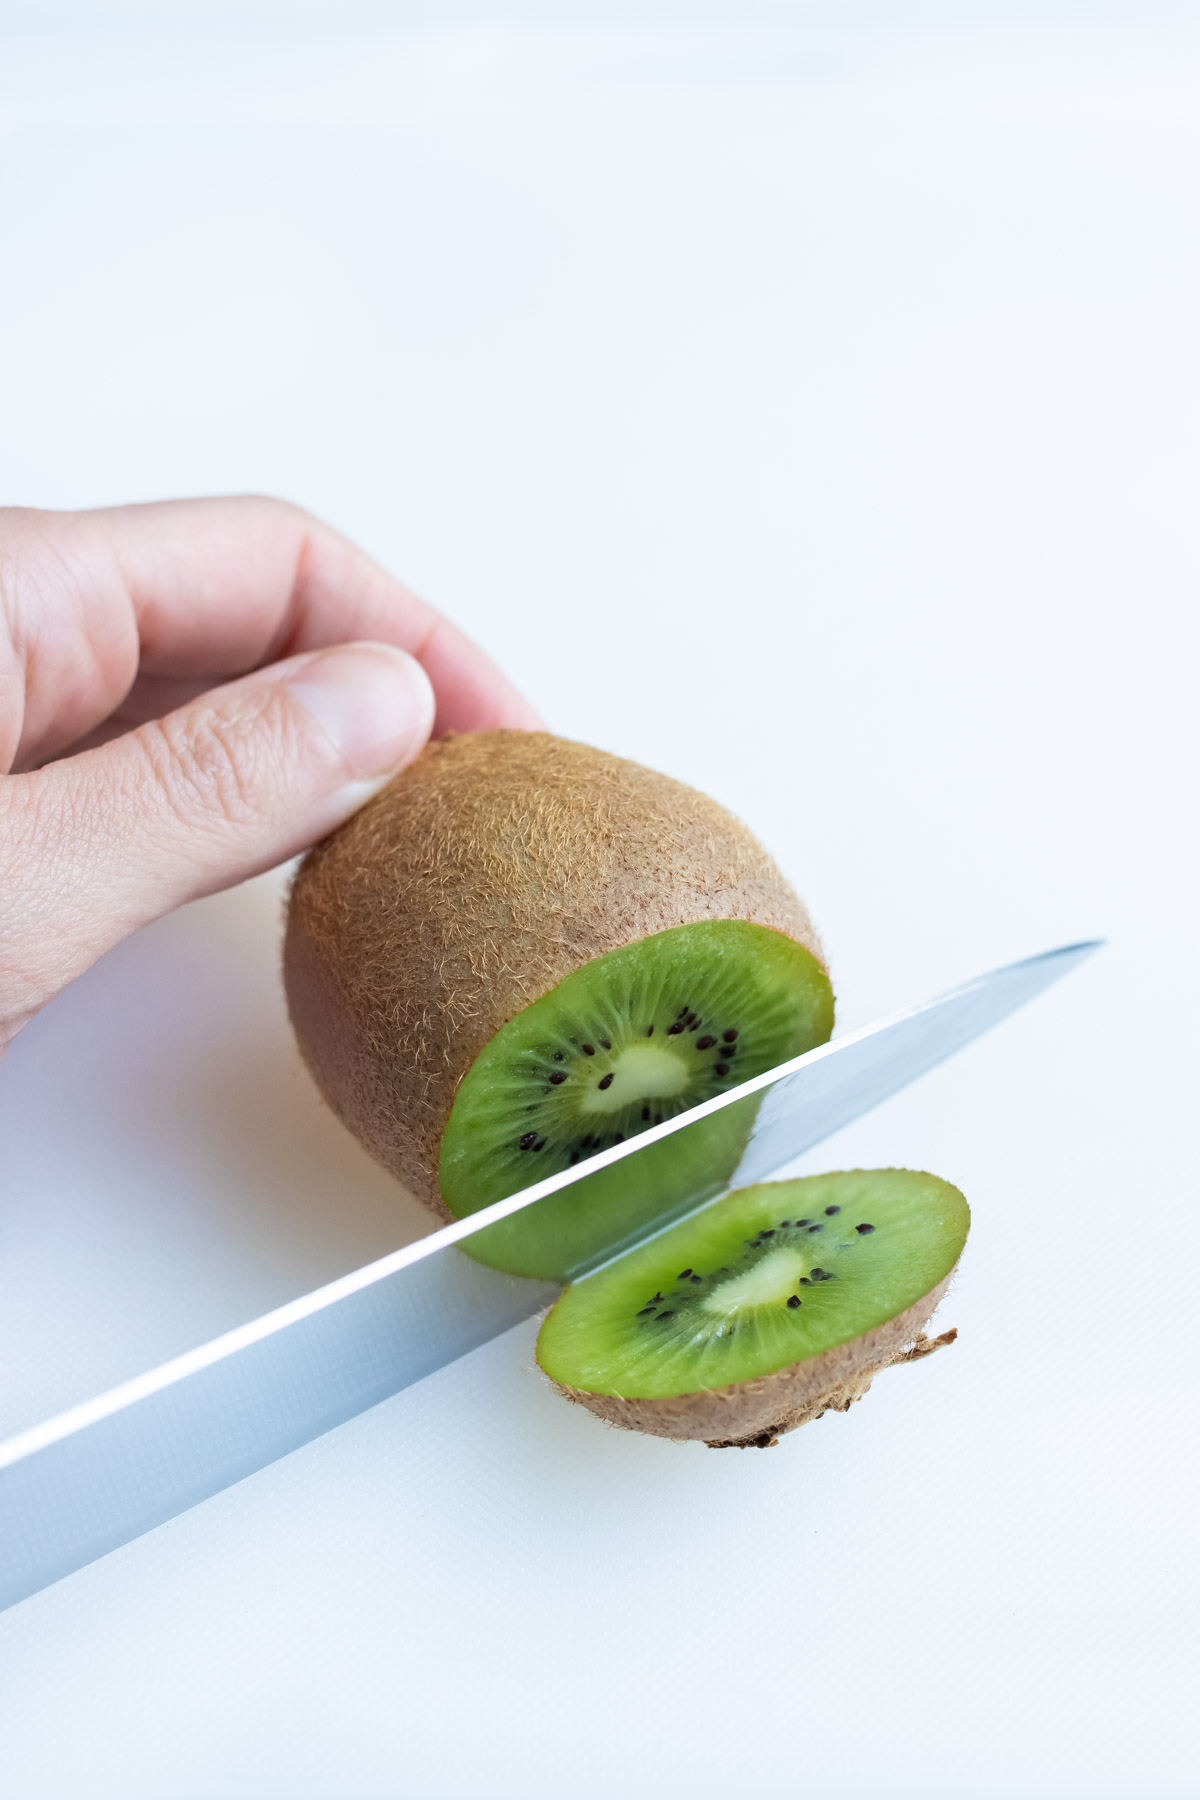 A long knife is used to cut off the end of one kiwi.